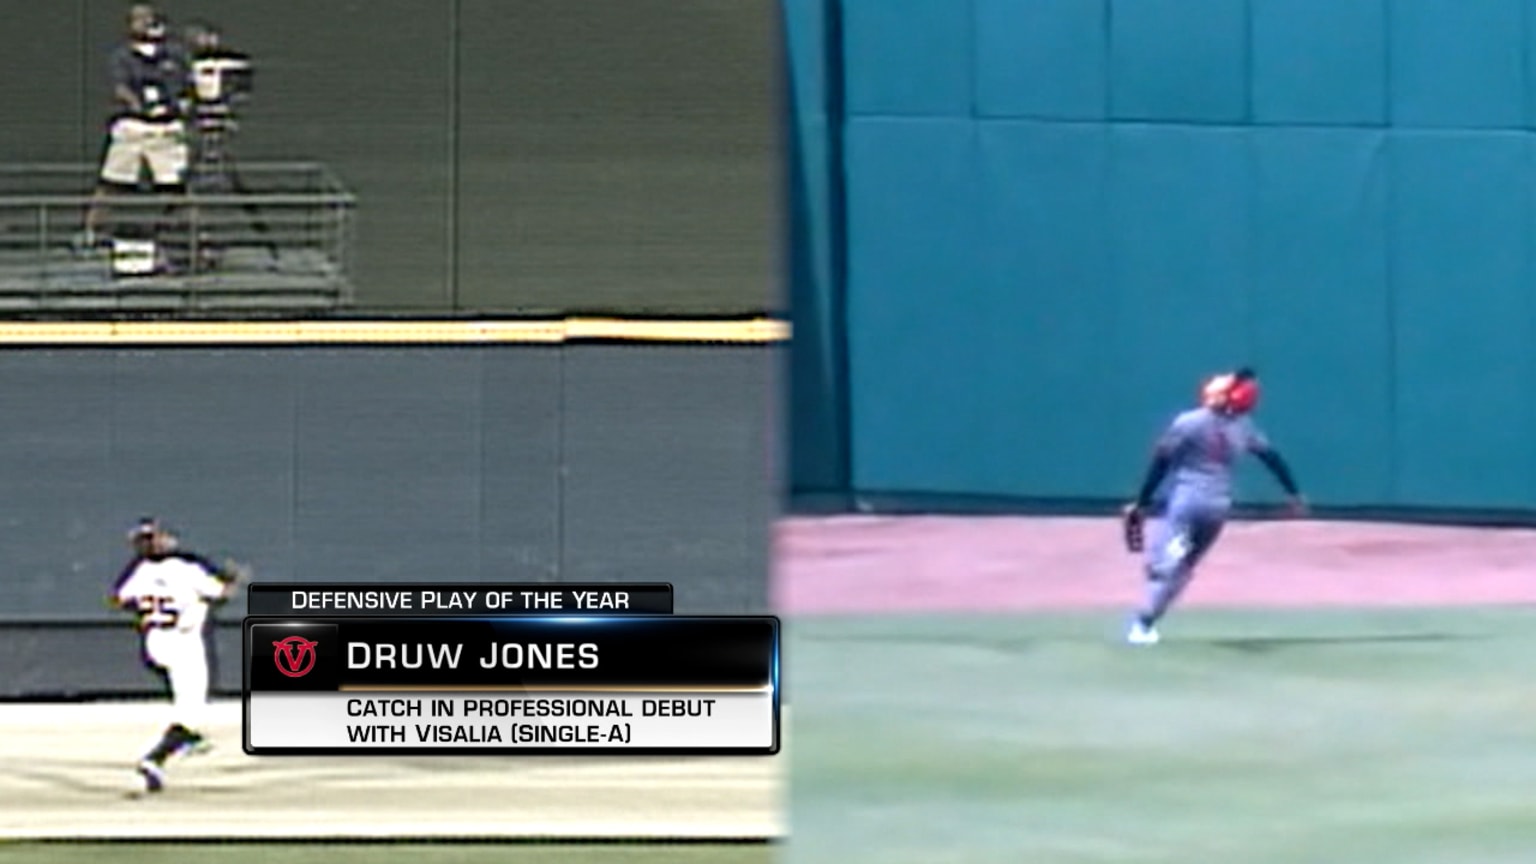 Top prospect Druw Jones will make his professional debut with Rawhide